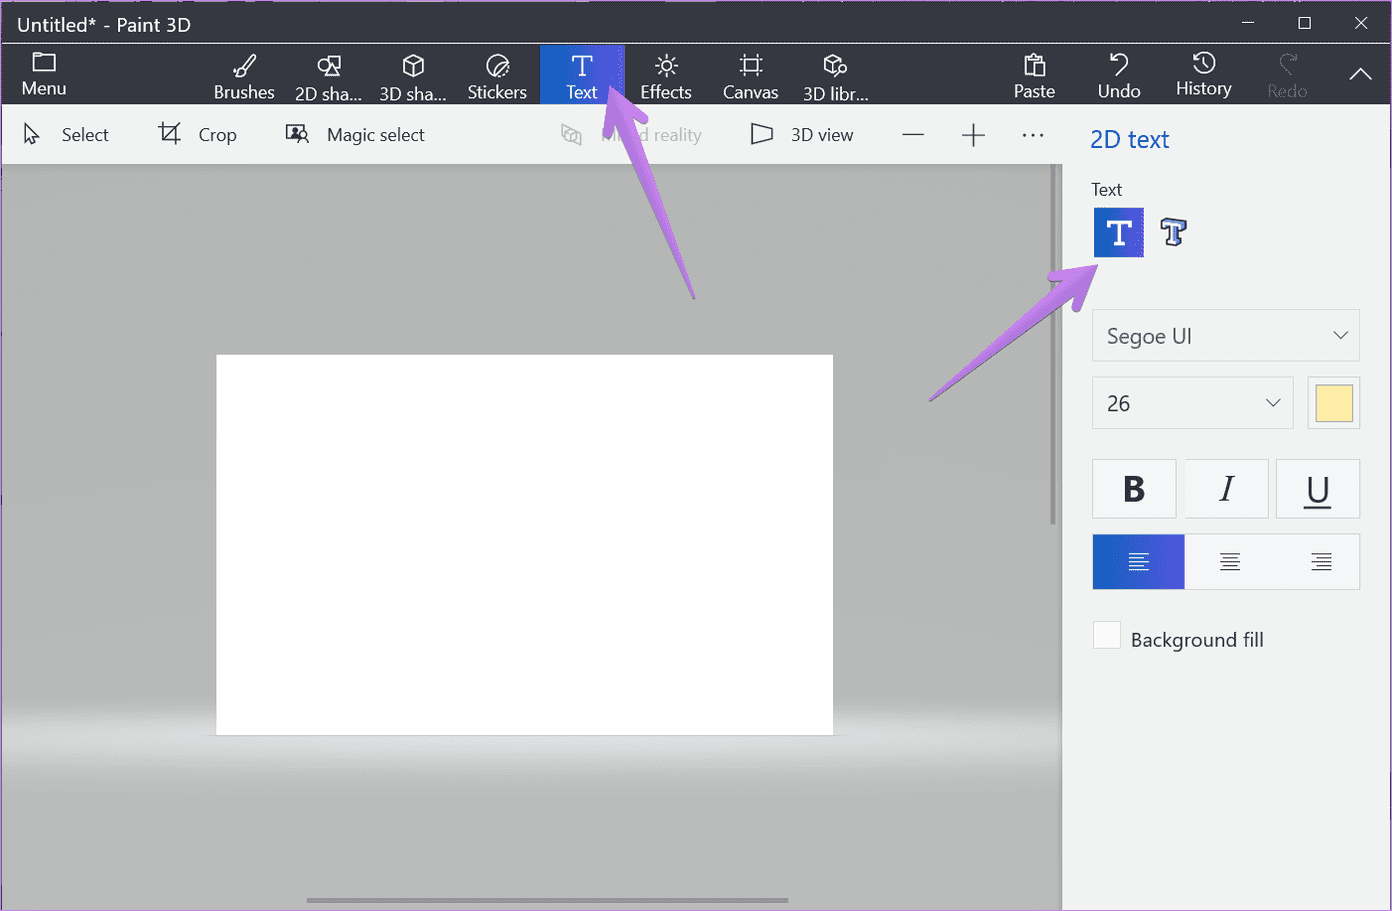 How to add text in paint 3d 1